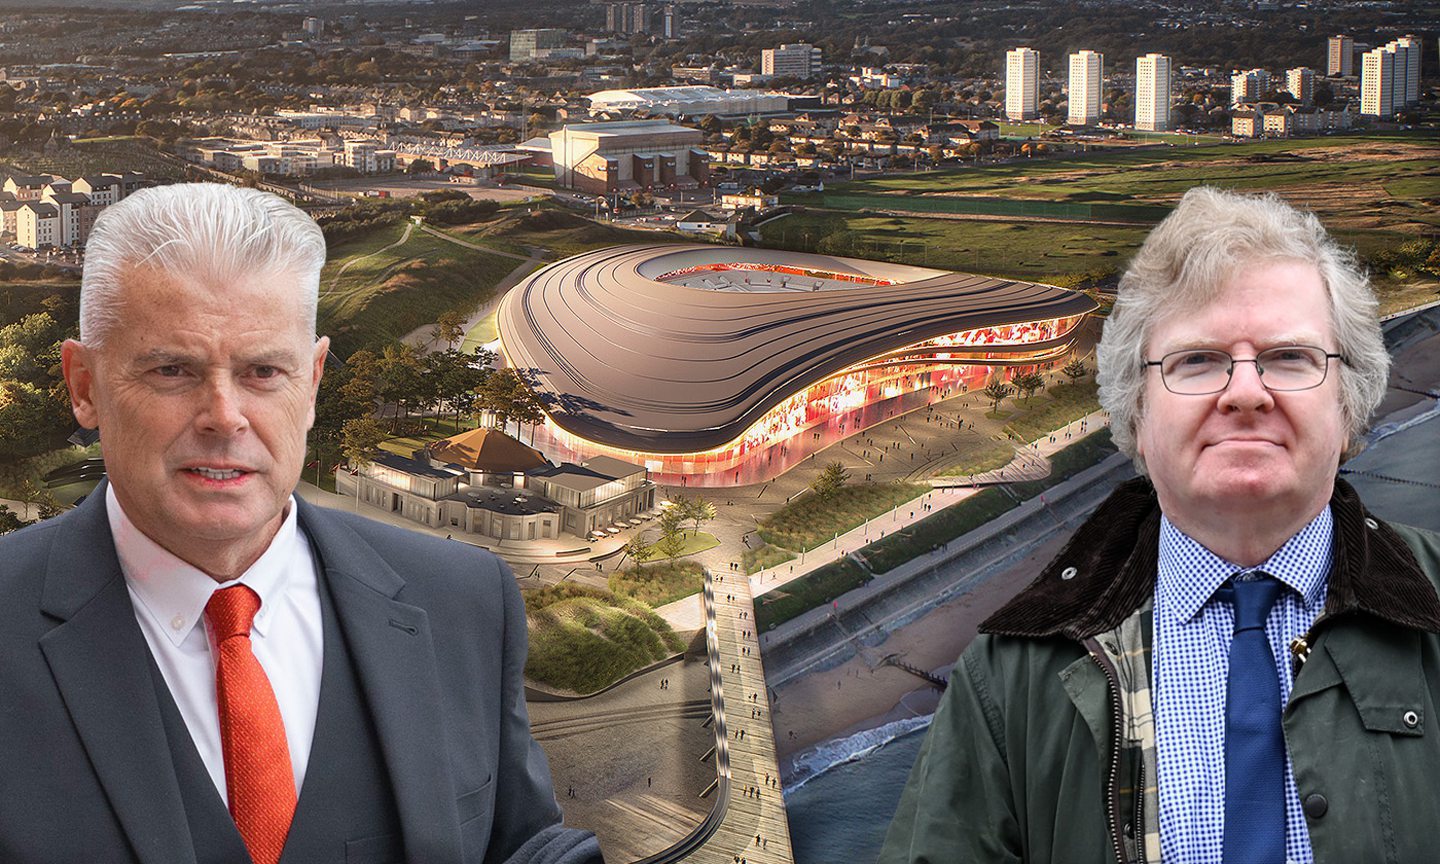 Council leaders appear adamant that no public money will go towards a new Aberdeen stadium